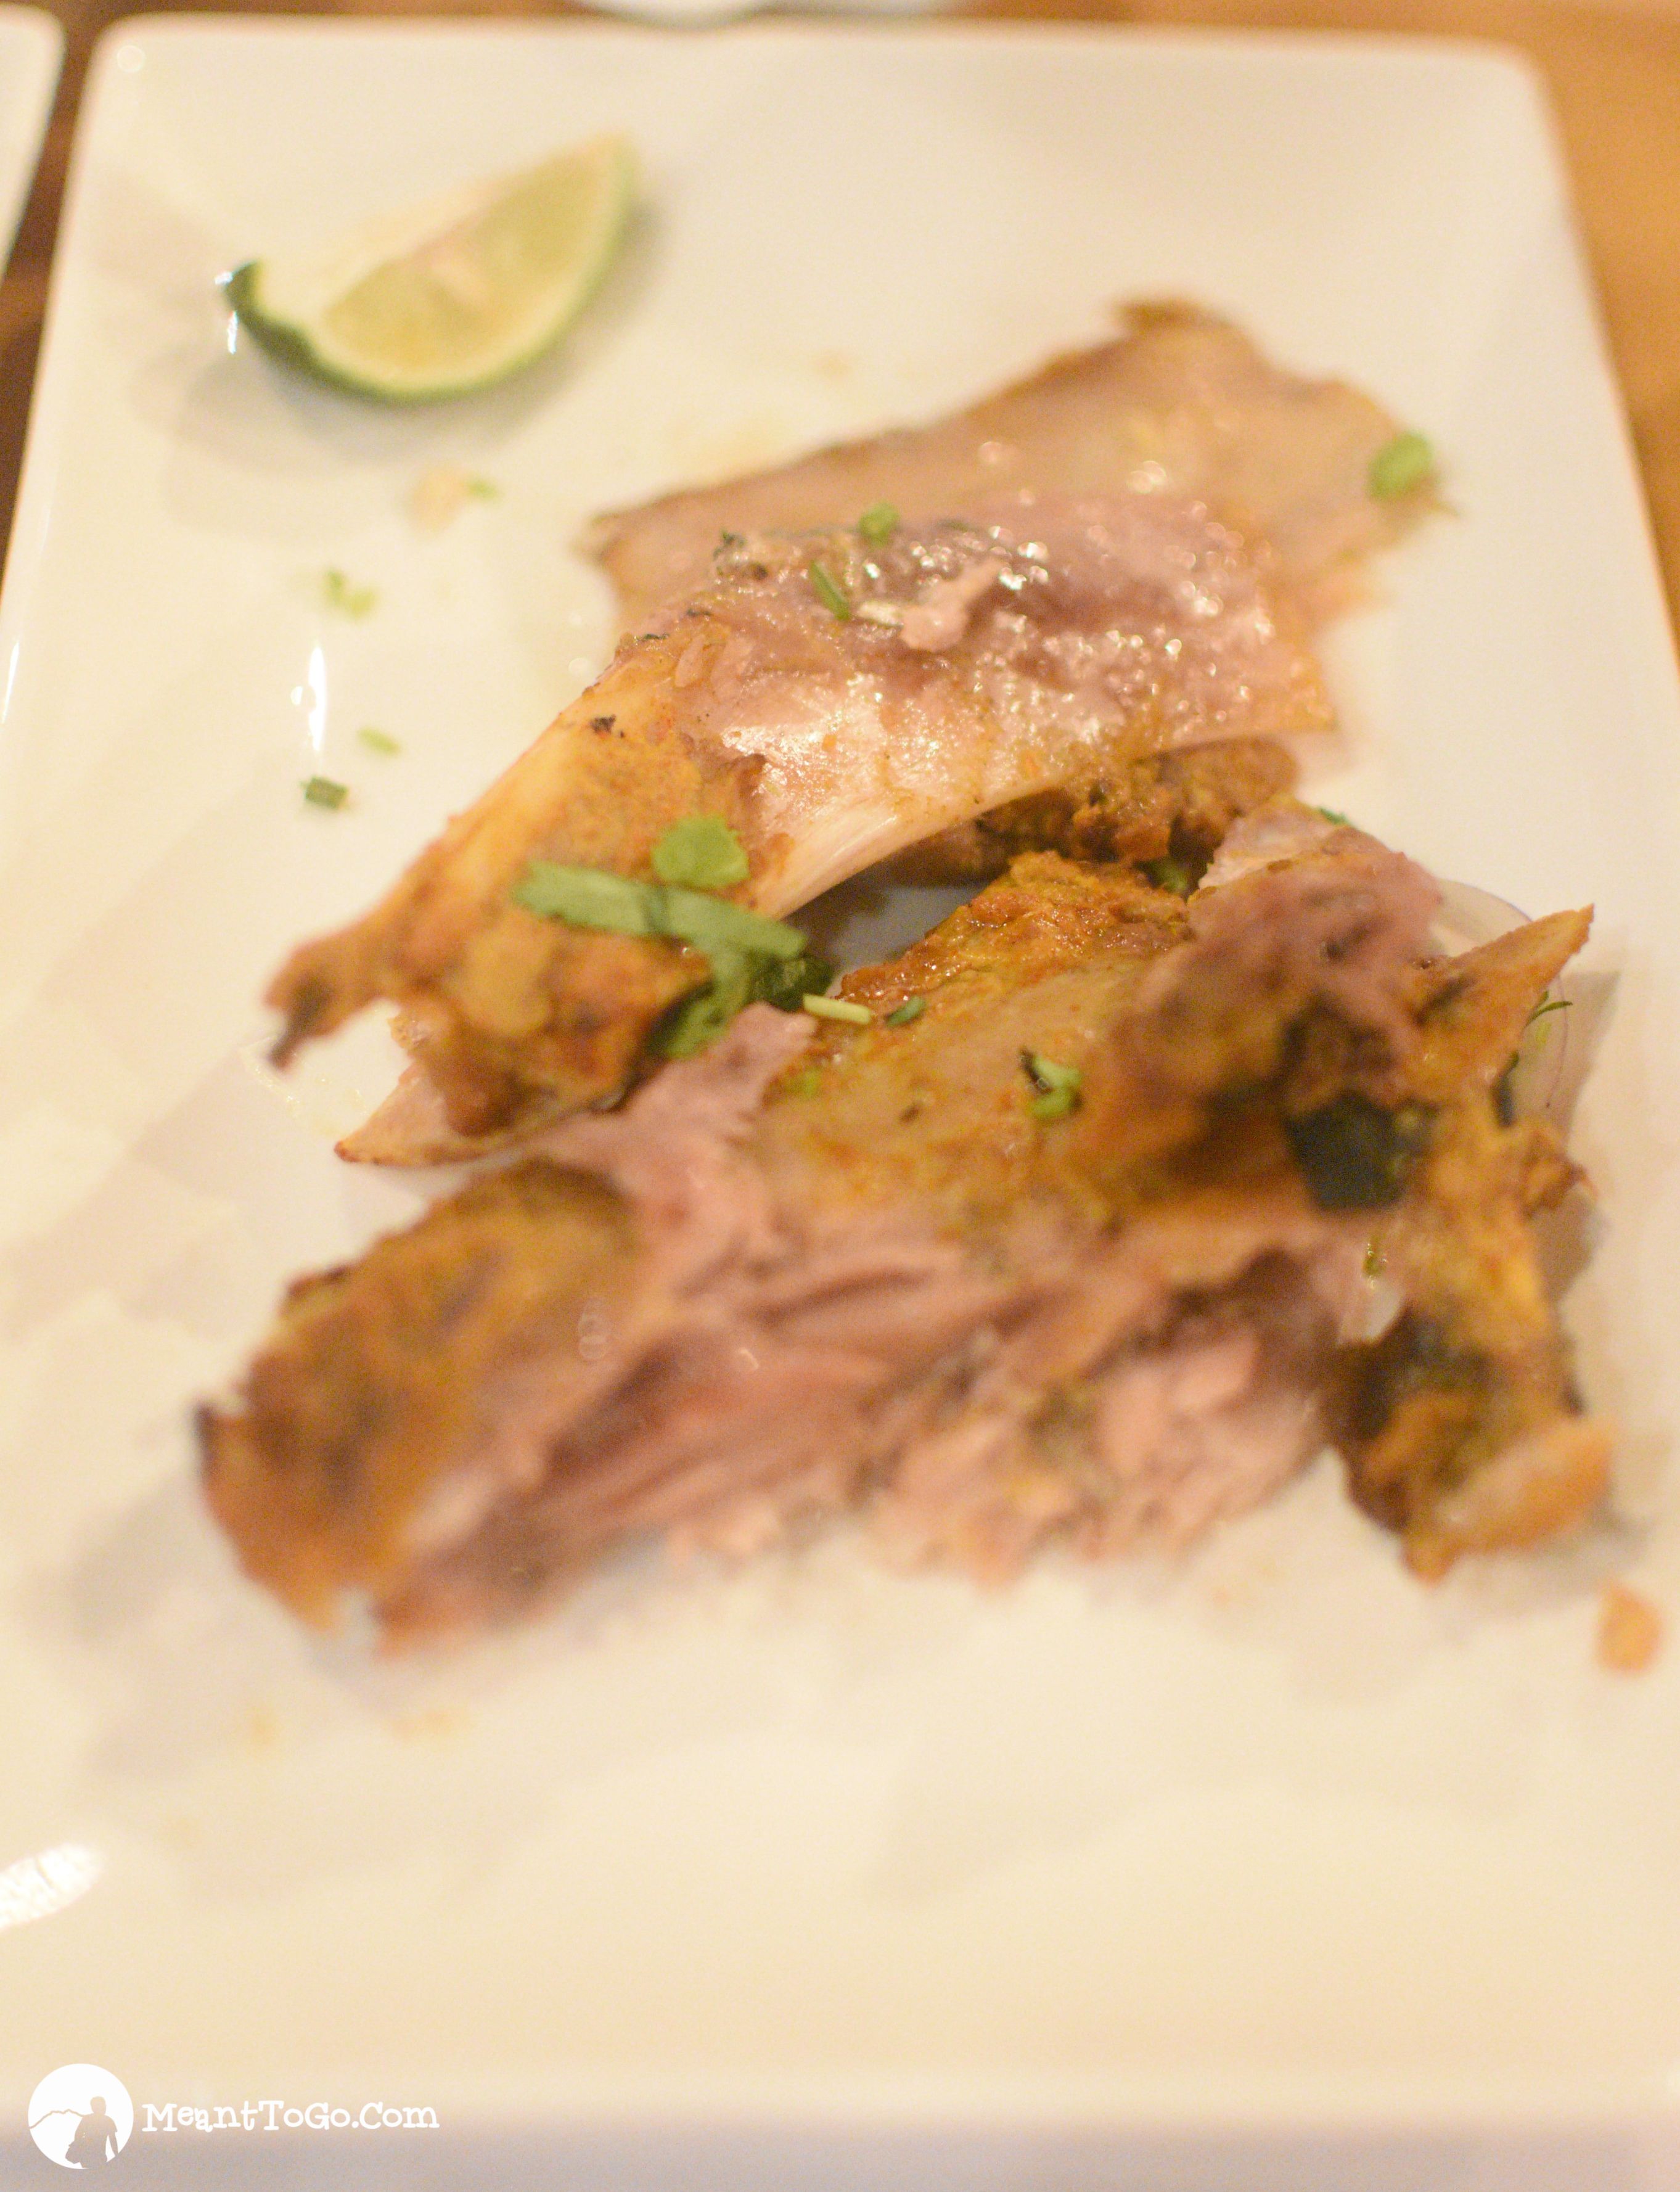 Tandoori Fish Belly served at the 5S Box Indian Restaurant in Davao City